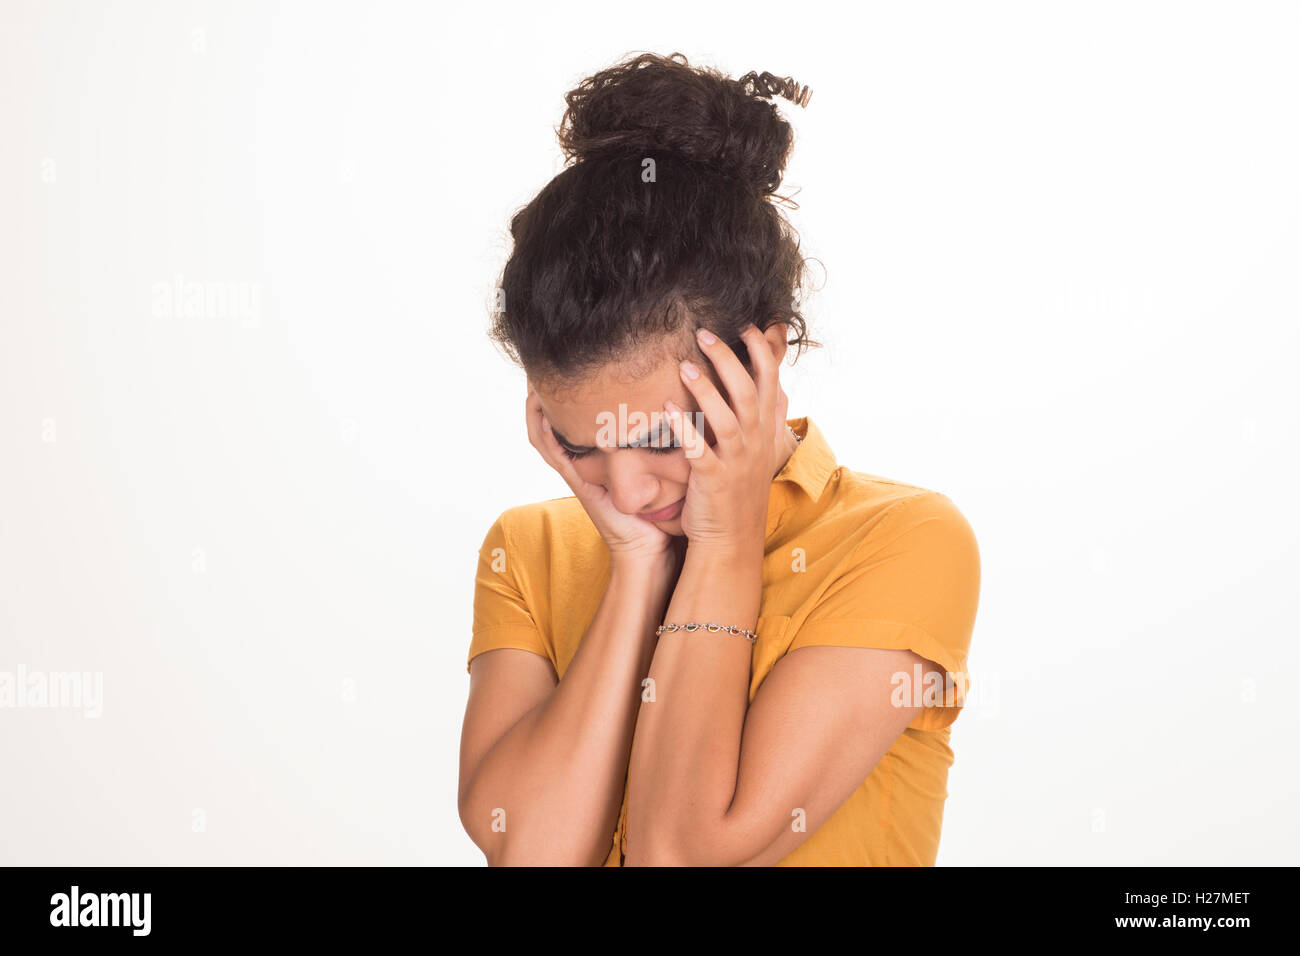 Upset young woman head in hands crying Stock Photo